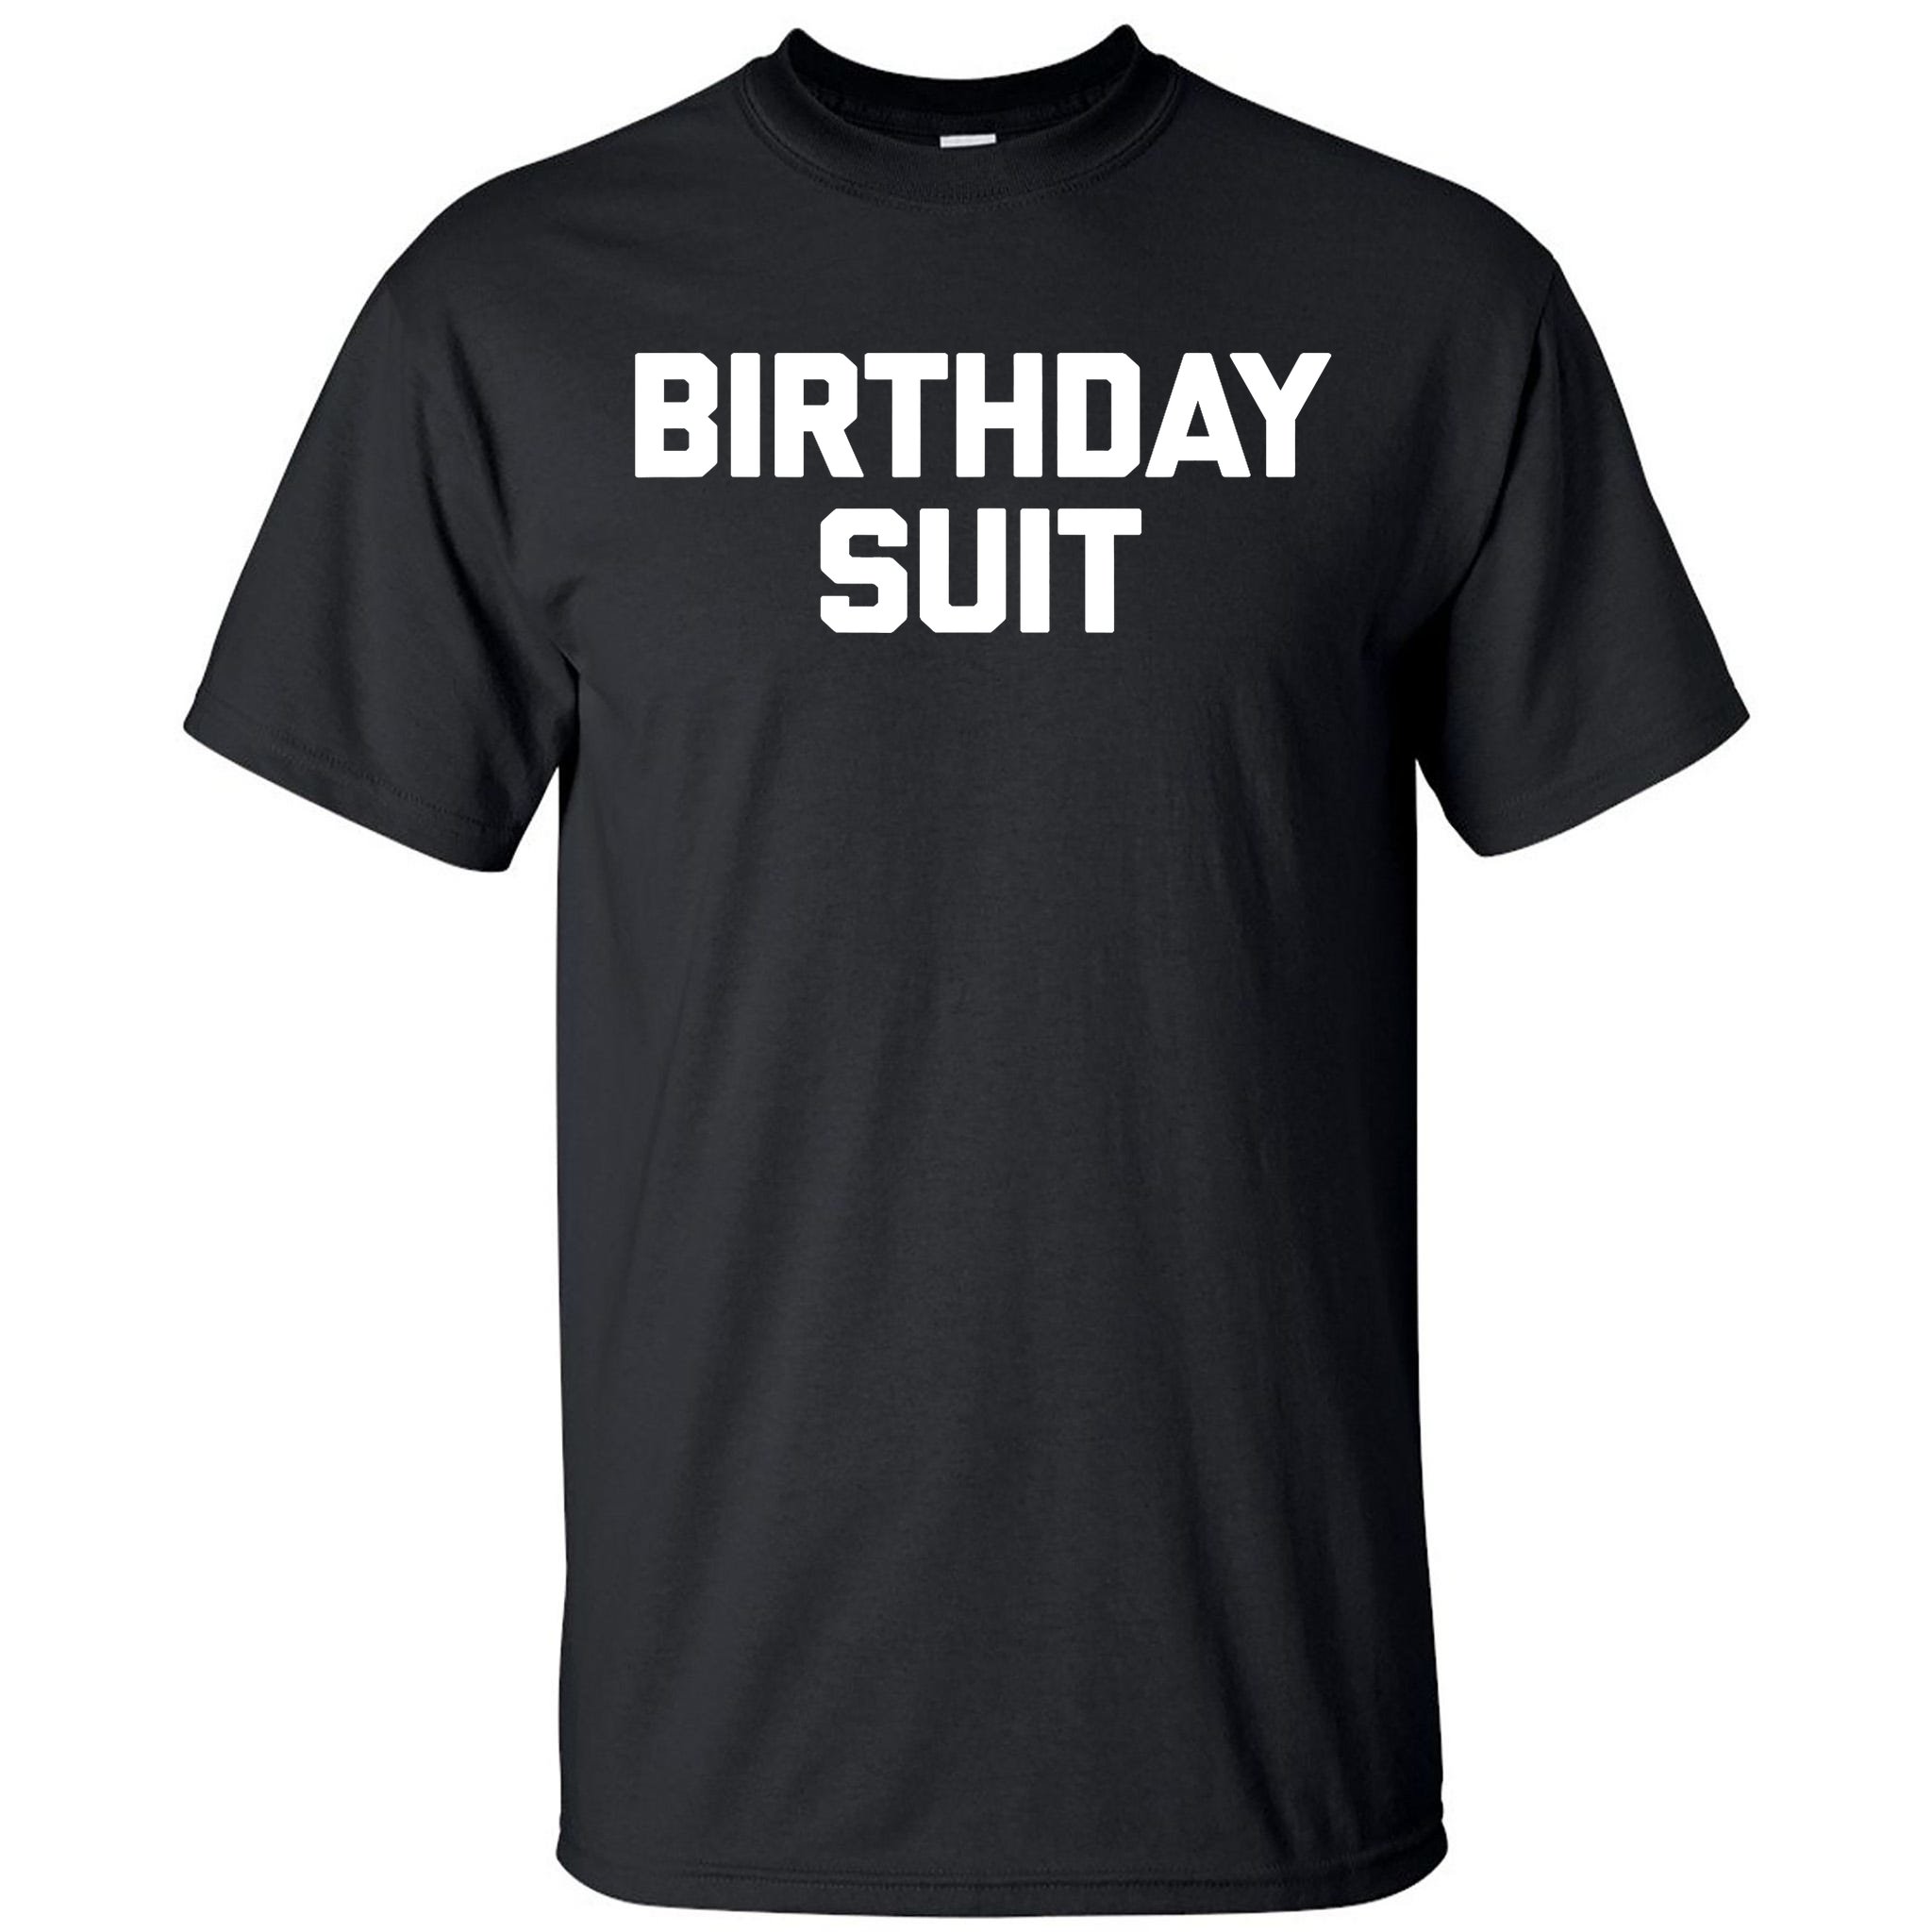 Designer Greetings They Call It a Birthday Suit Funny : Humorous